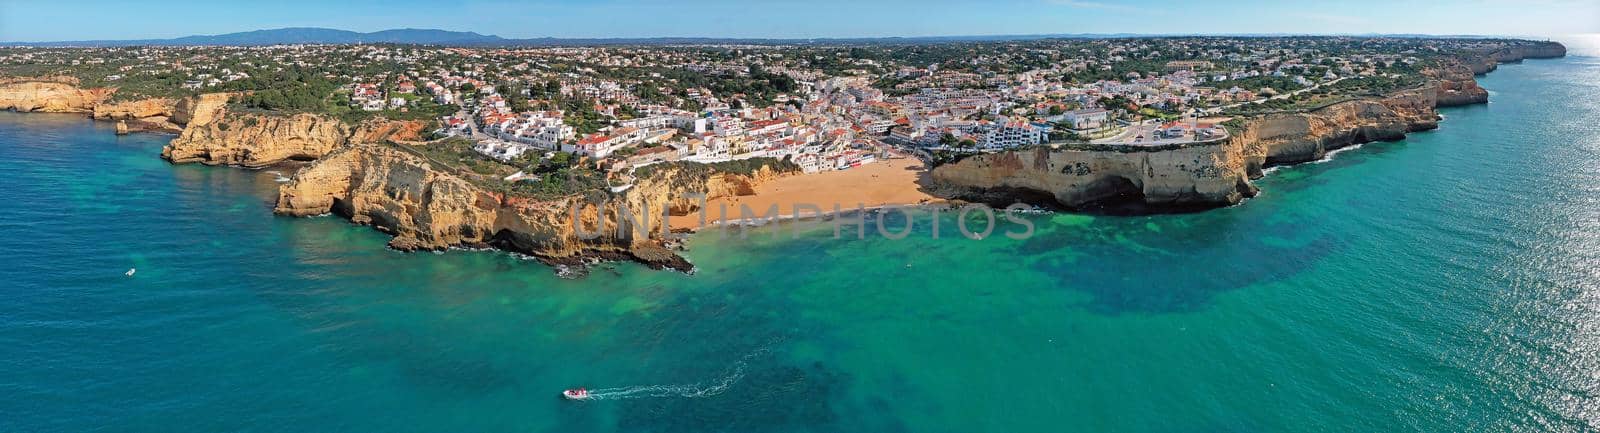 Aerial panorama from the historical village Carvoeiro in the Algarve Portugal by devy